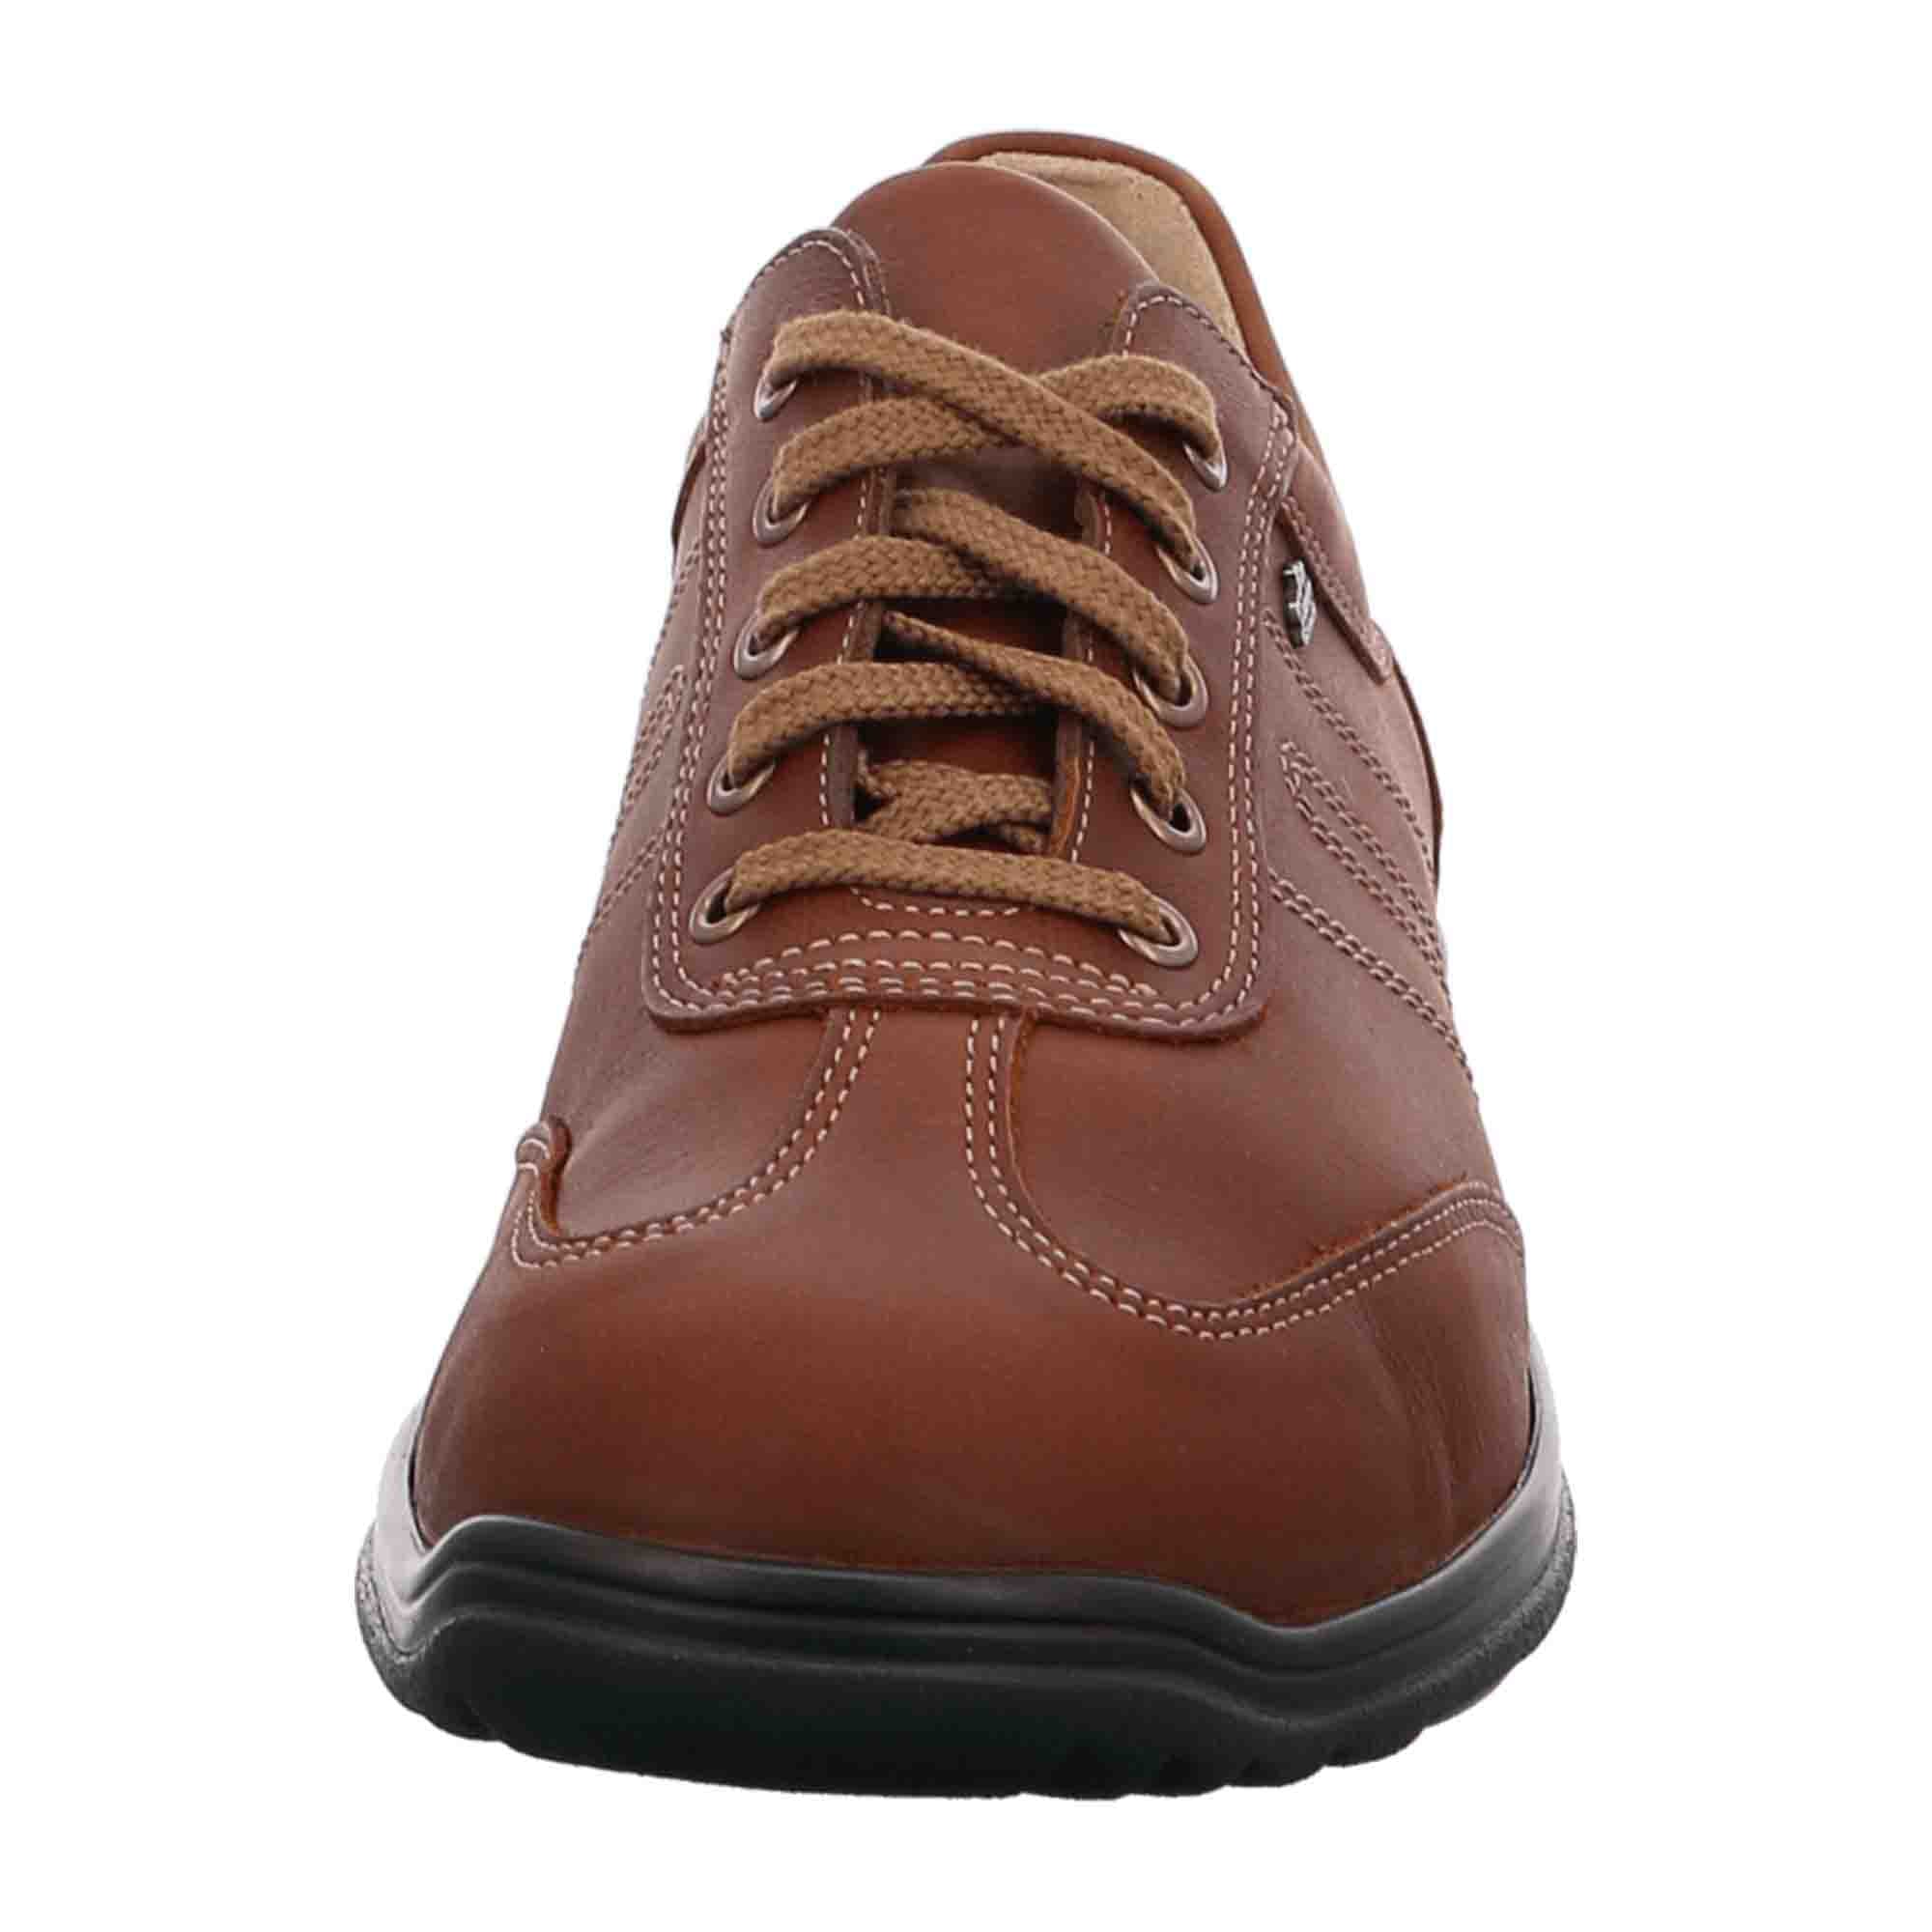 Finn Comfort Syracuse Men's Comfortable Leather Shoes - Stylish Brown